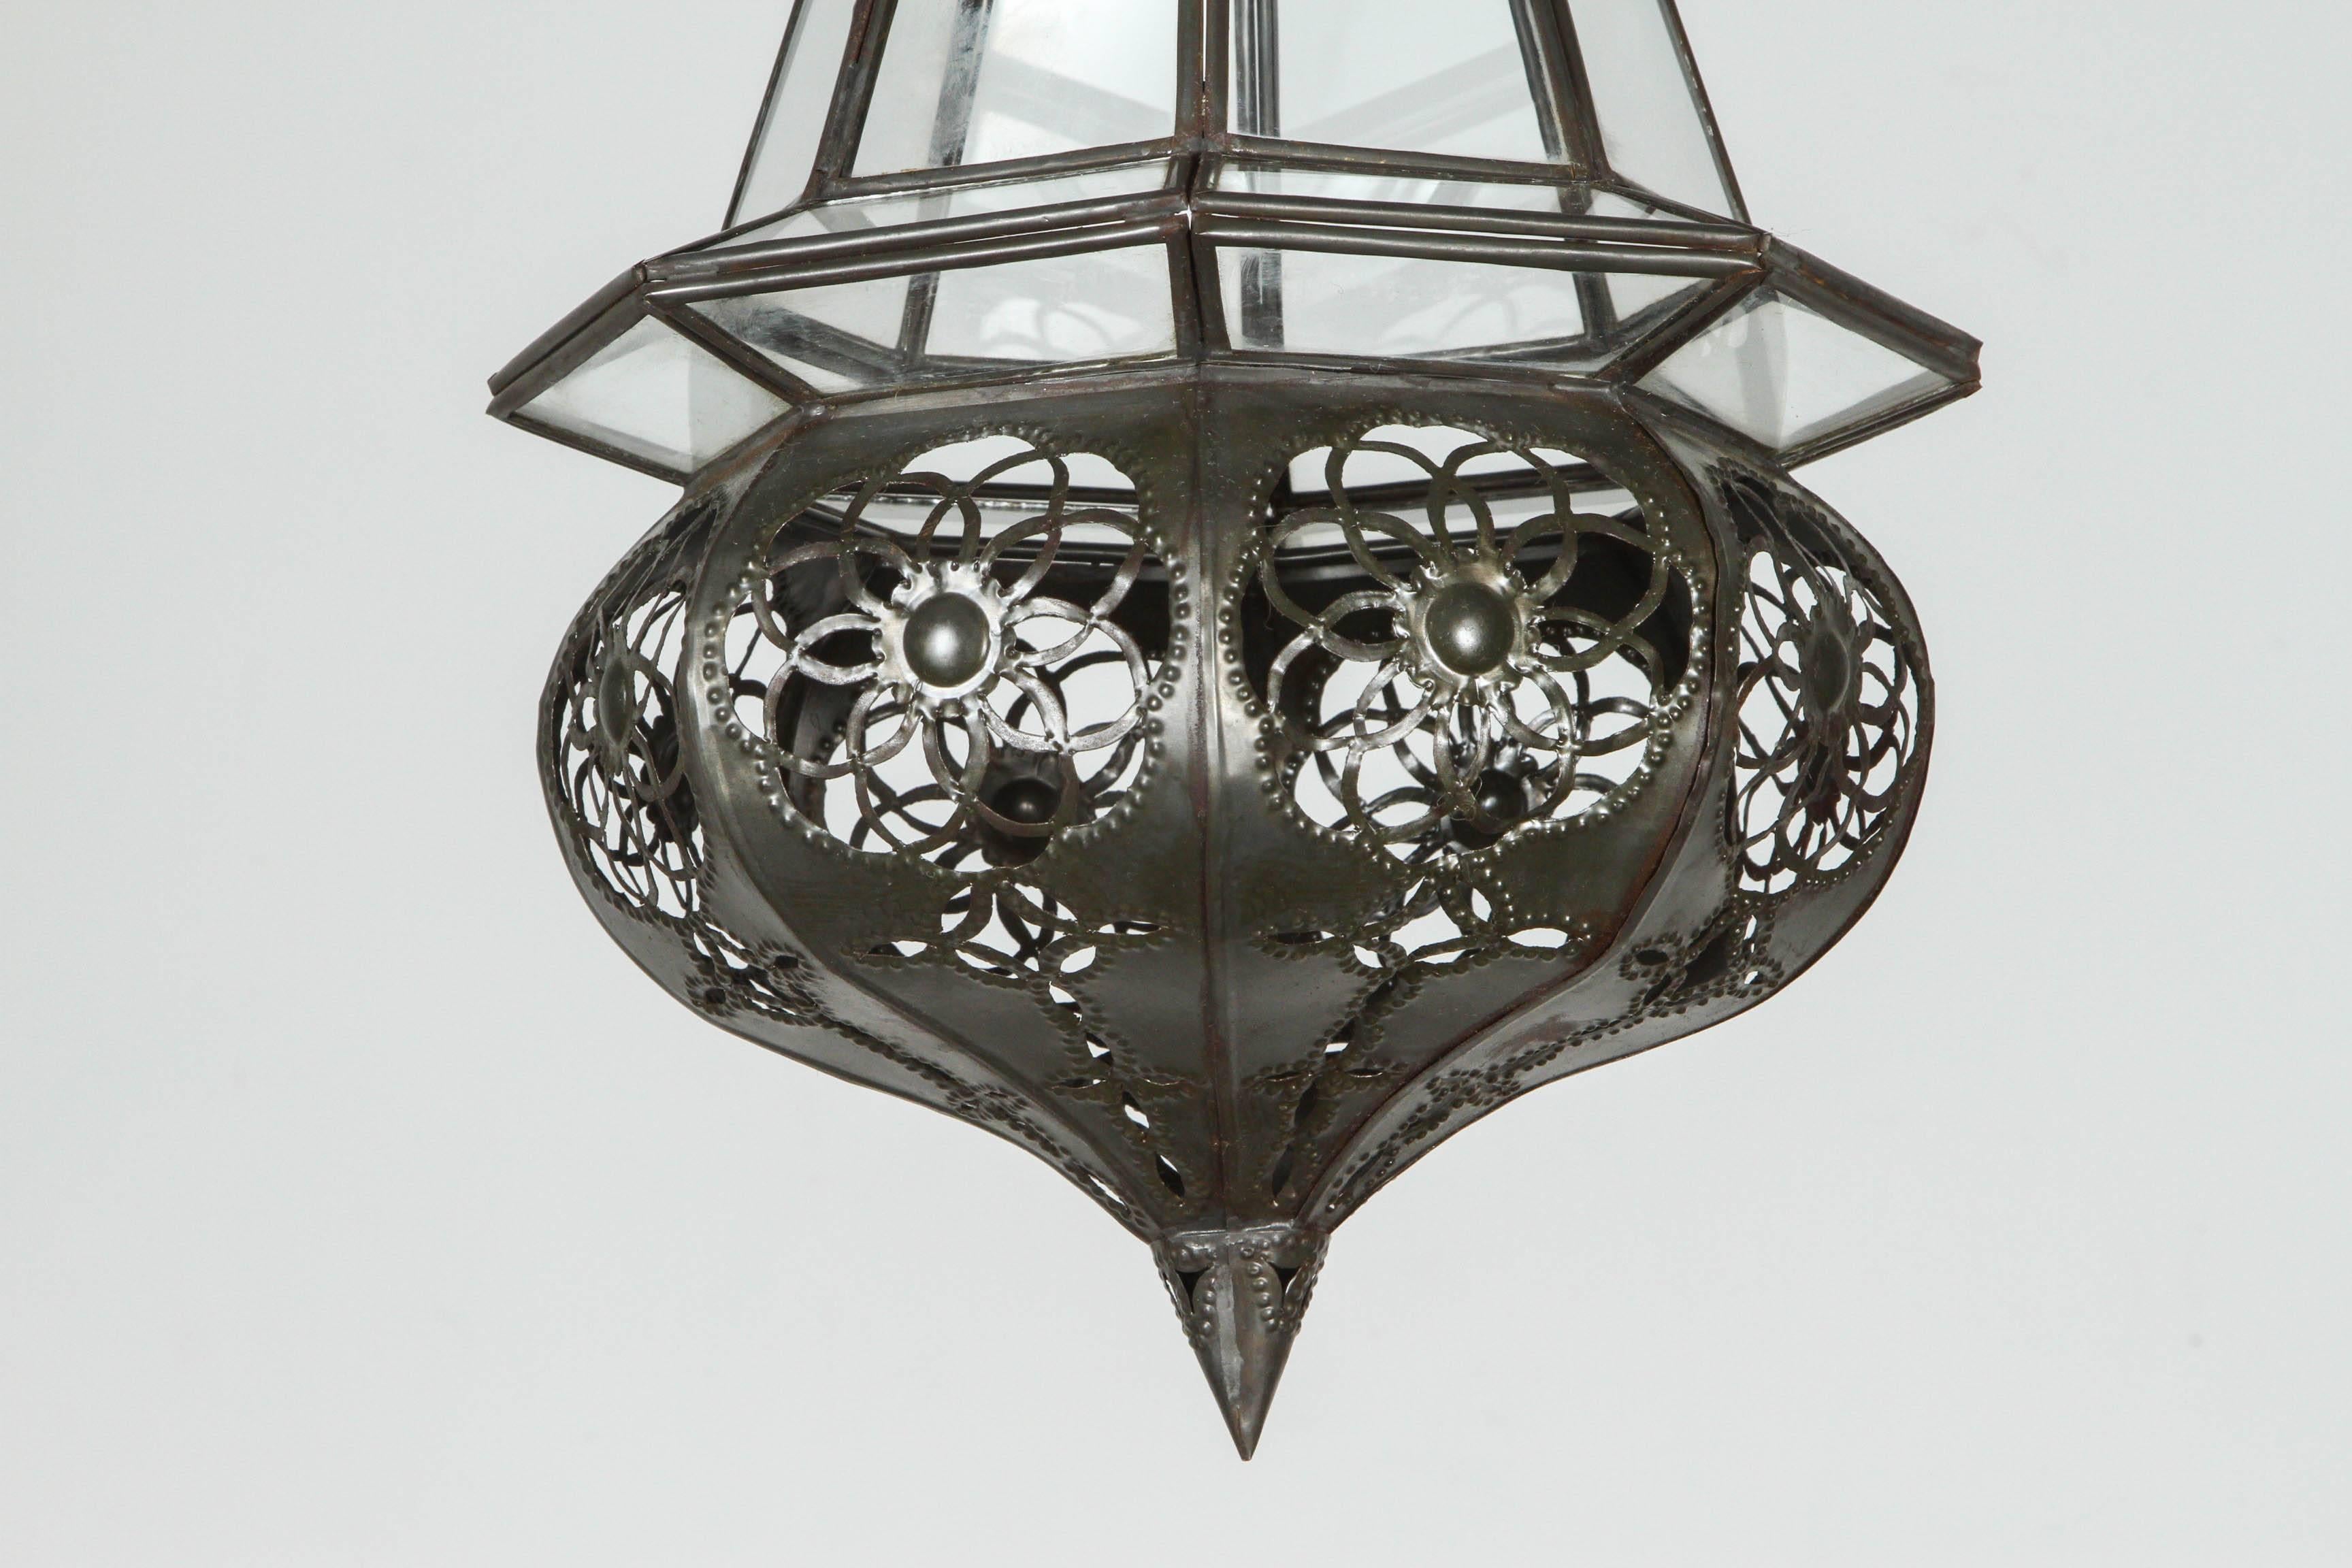 Handcrafted Moroccan clear glass metal pendant.
Finely hand-cut metal in Moorish floral and geometric designs.
Diamond shape light fixture in dark bronze metal color finish.
Rewired with one light bulb, comes with additional chain and canopy,